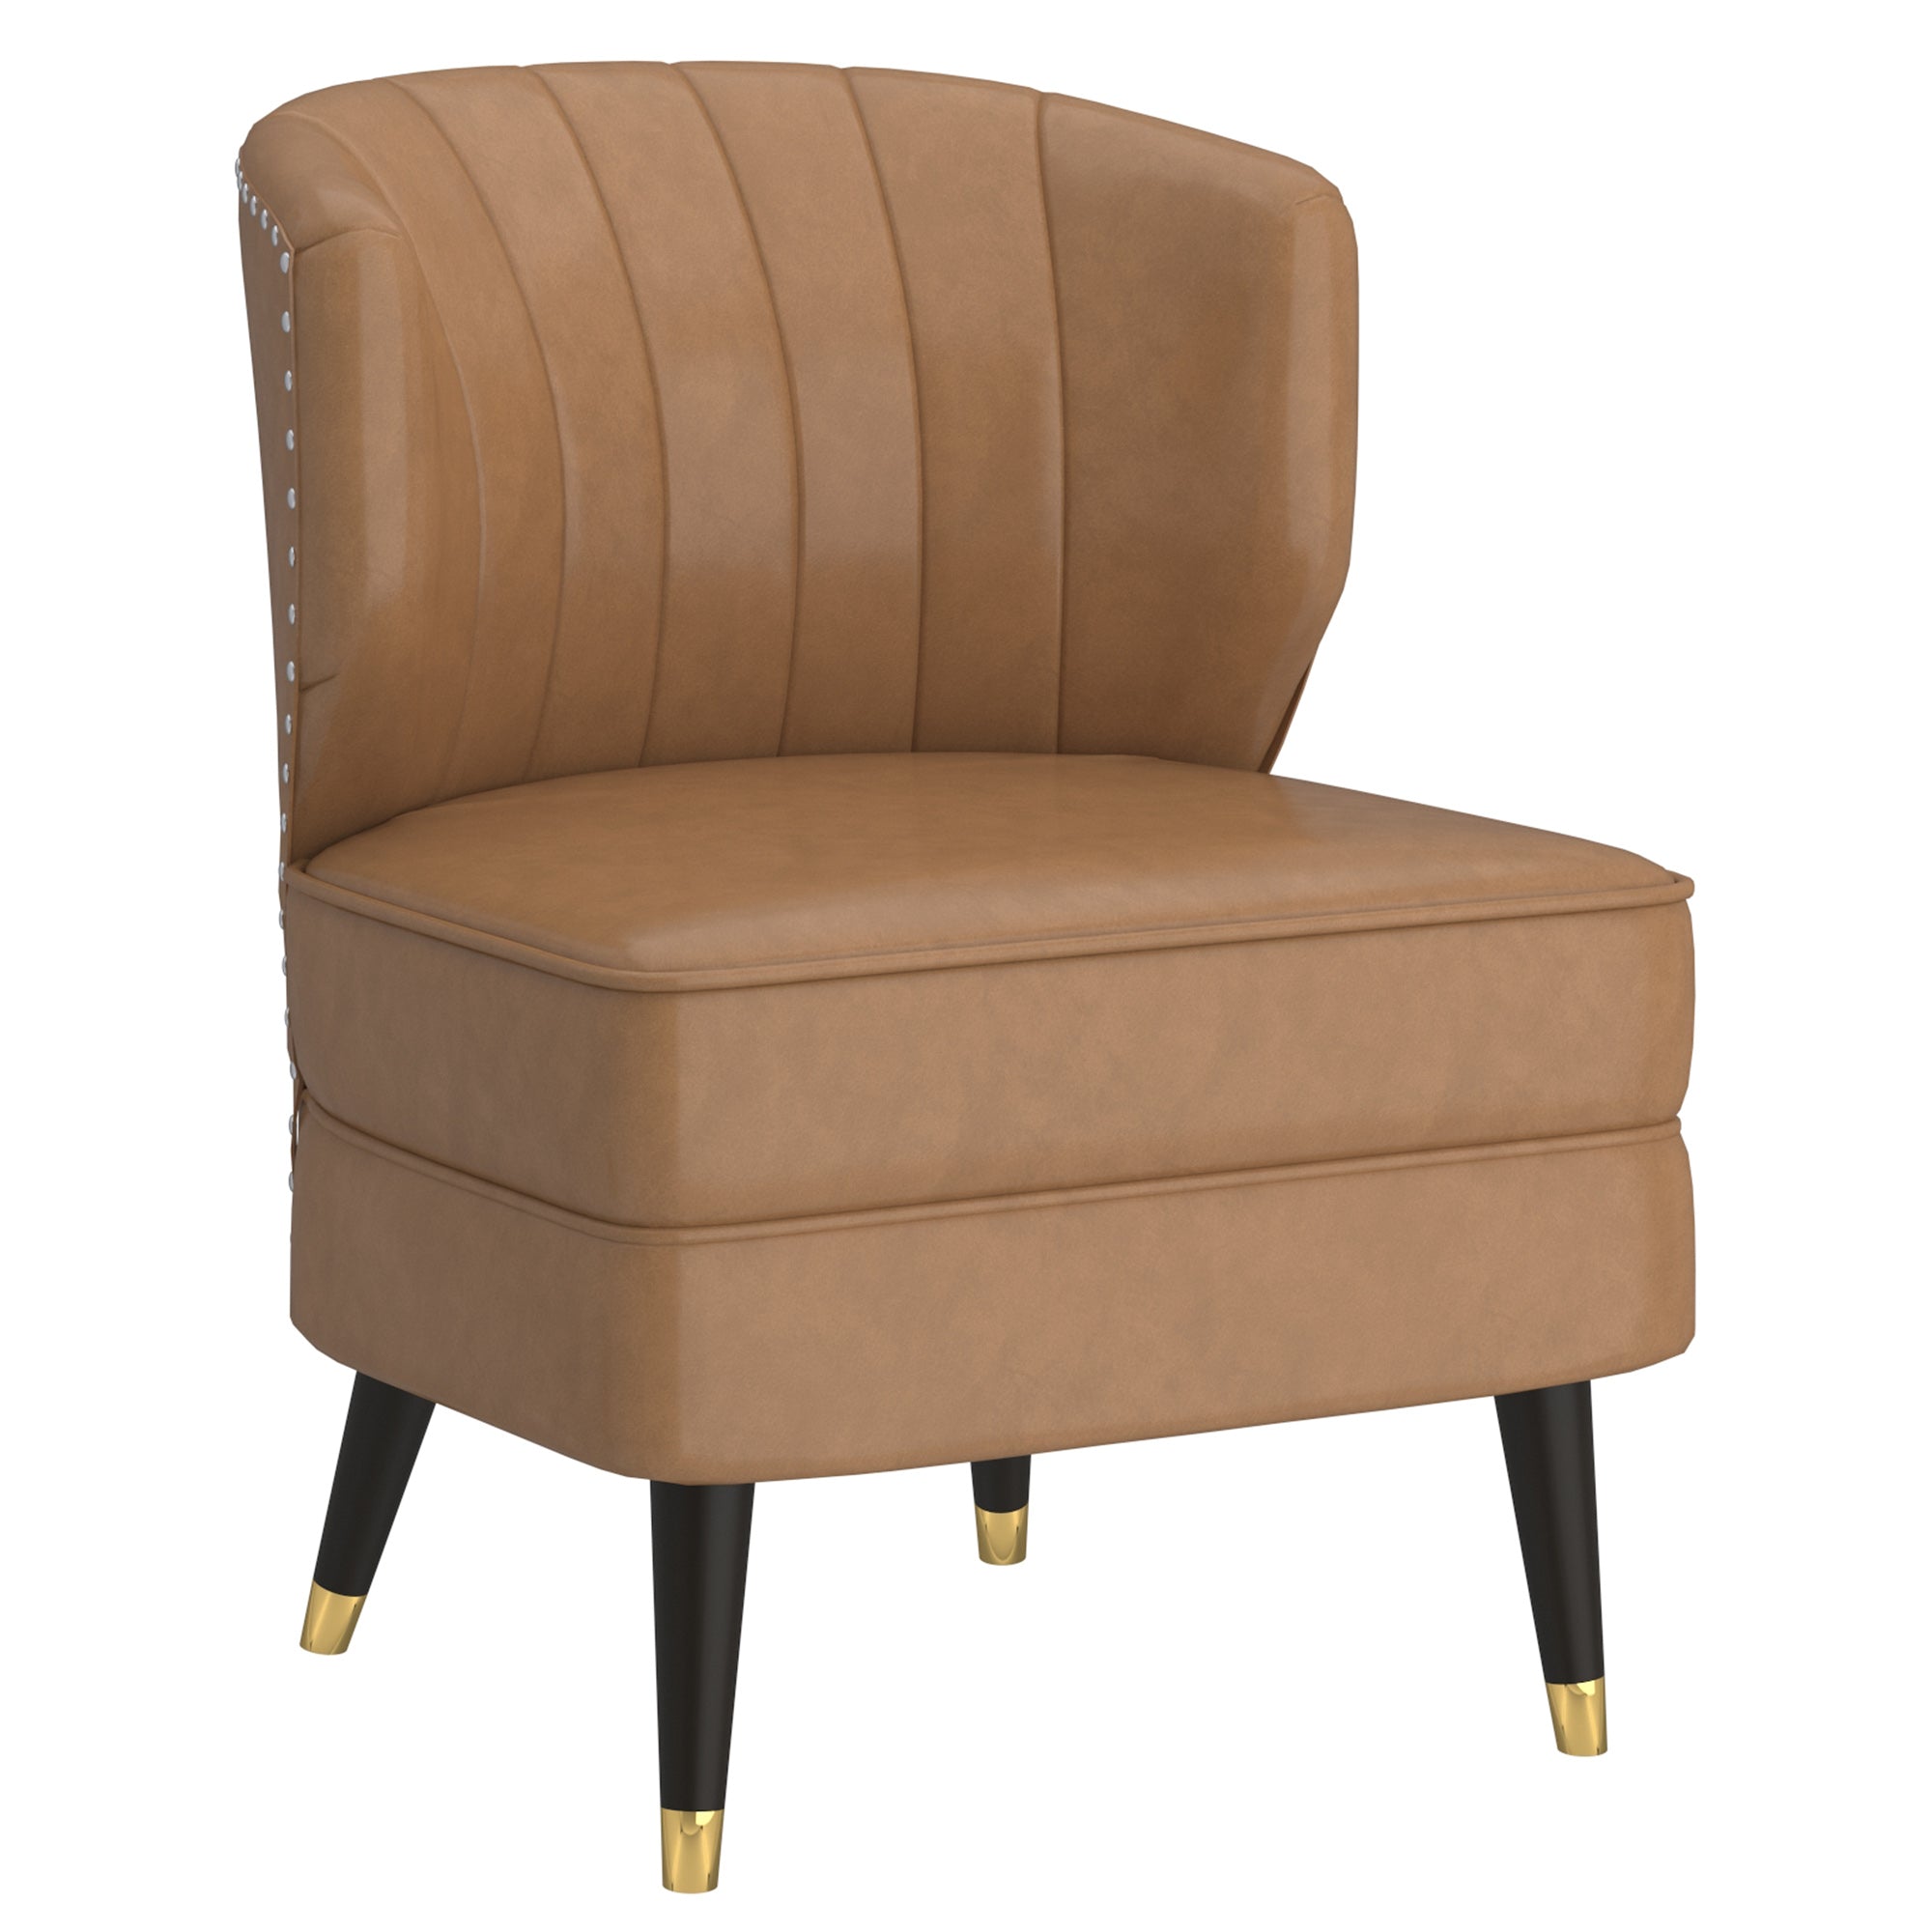 KYRIE-ACCENT CHAIR-SADDLE